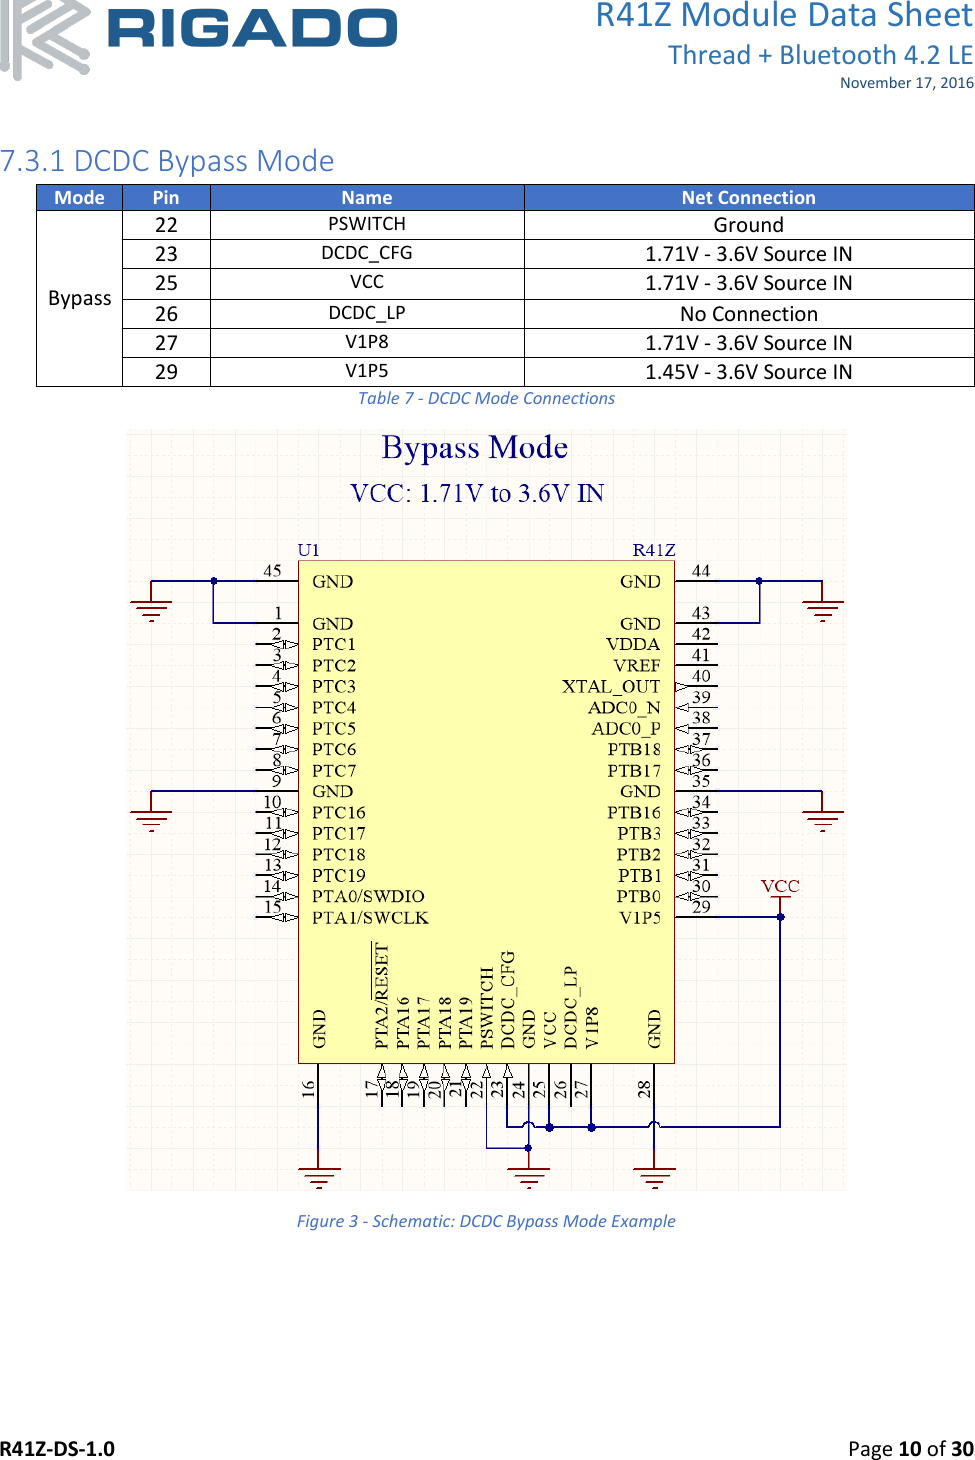 R41Z Module Data Sheet Thread + Bluetooth 4.2 LE November 17, 2016 R41Z-DS-1.0    Page 10 of 30   7.3.1 DCDC Bypass Mode Mode Pin Name Net Connection Bypass 22 PSWITCH Ground 23 DCDC_CFG 1.71V - 3.6V Source IN 25 VCC 1.71V - 3.6V Source IN 26 DCDC_LP No Connection 27 V1P8 1.71V - 3.6V Source IN 29 V1P5 1.45V - 3.6V Source IN Table 7 - DCDC Mode Connections  Figure 3 - Schematic: DCDC Bypass Mode Example    